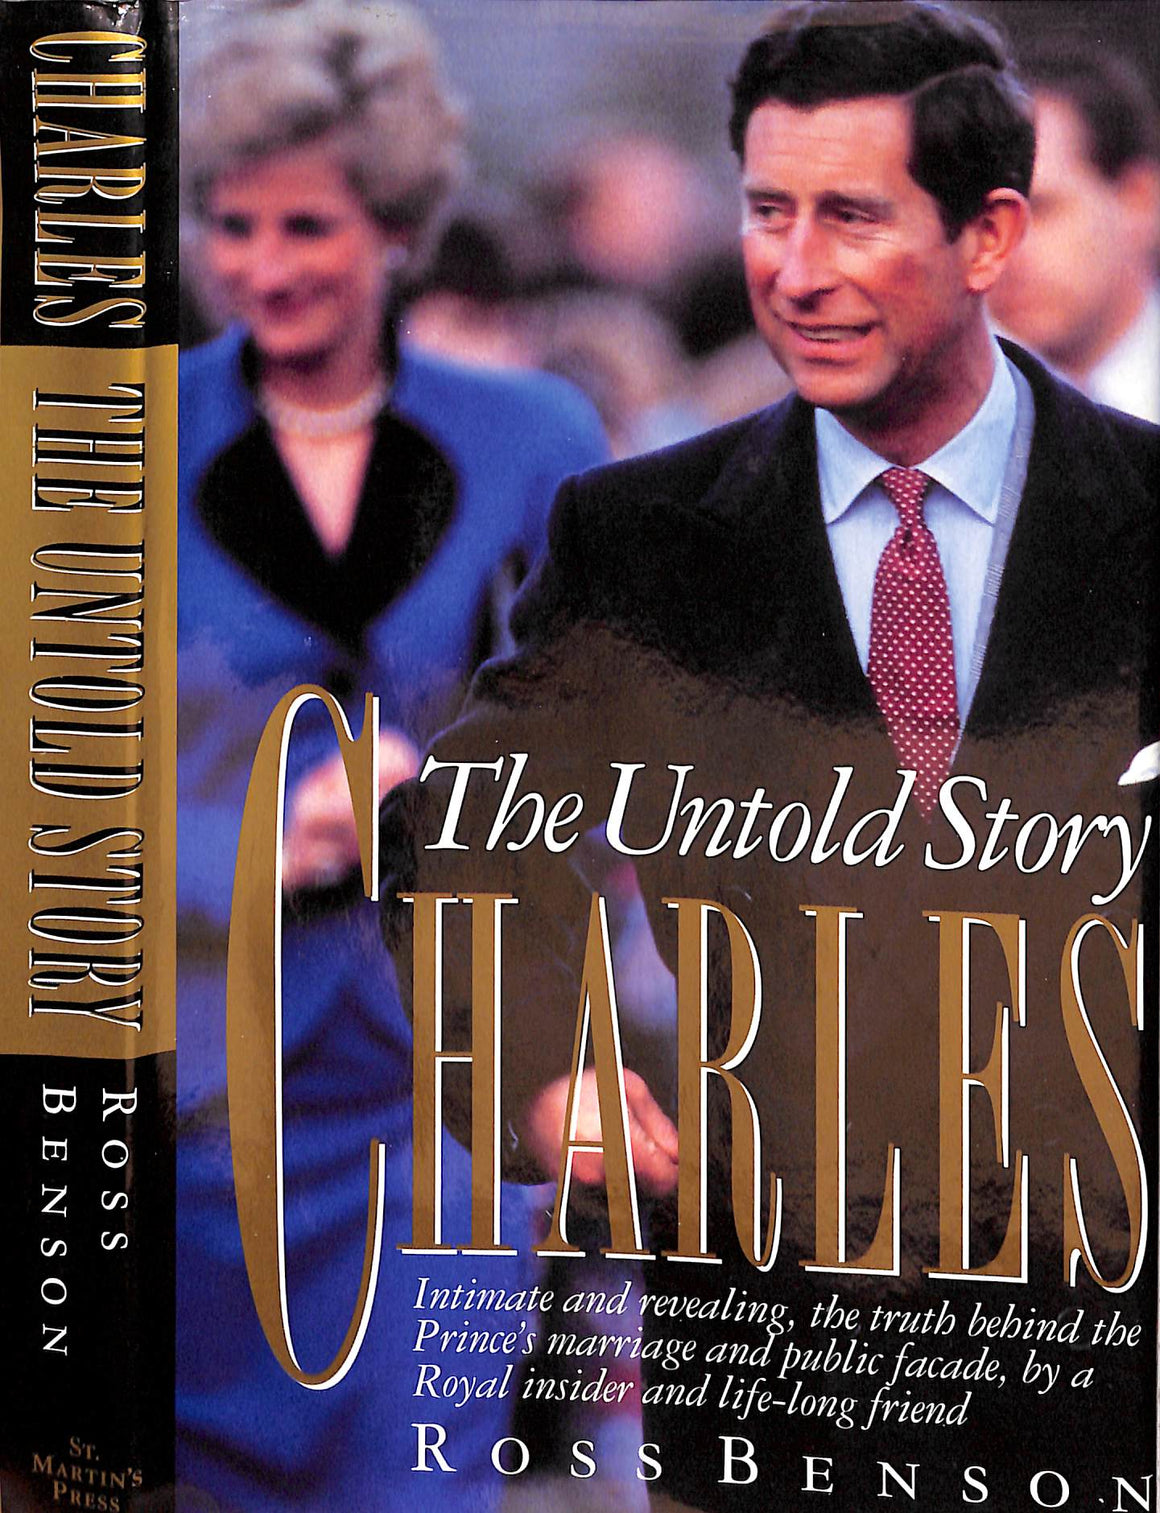 "Charles: The Untold Story" 1993 BENSON, Ross